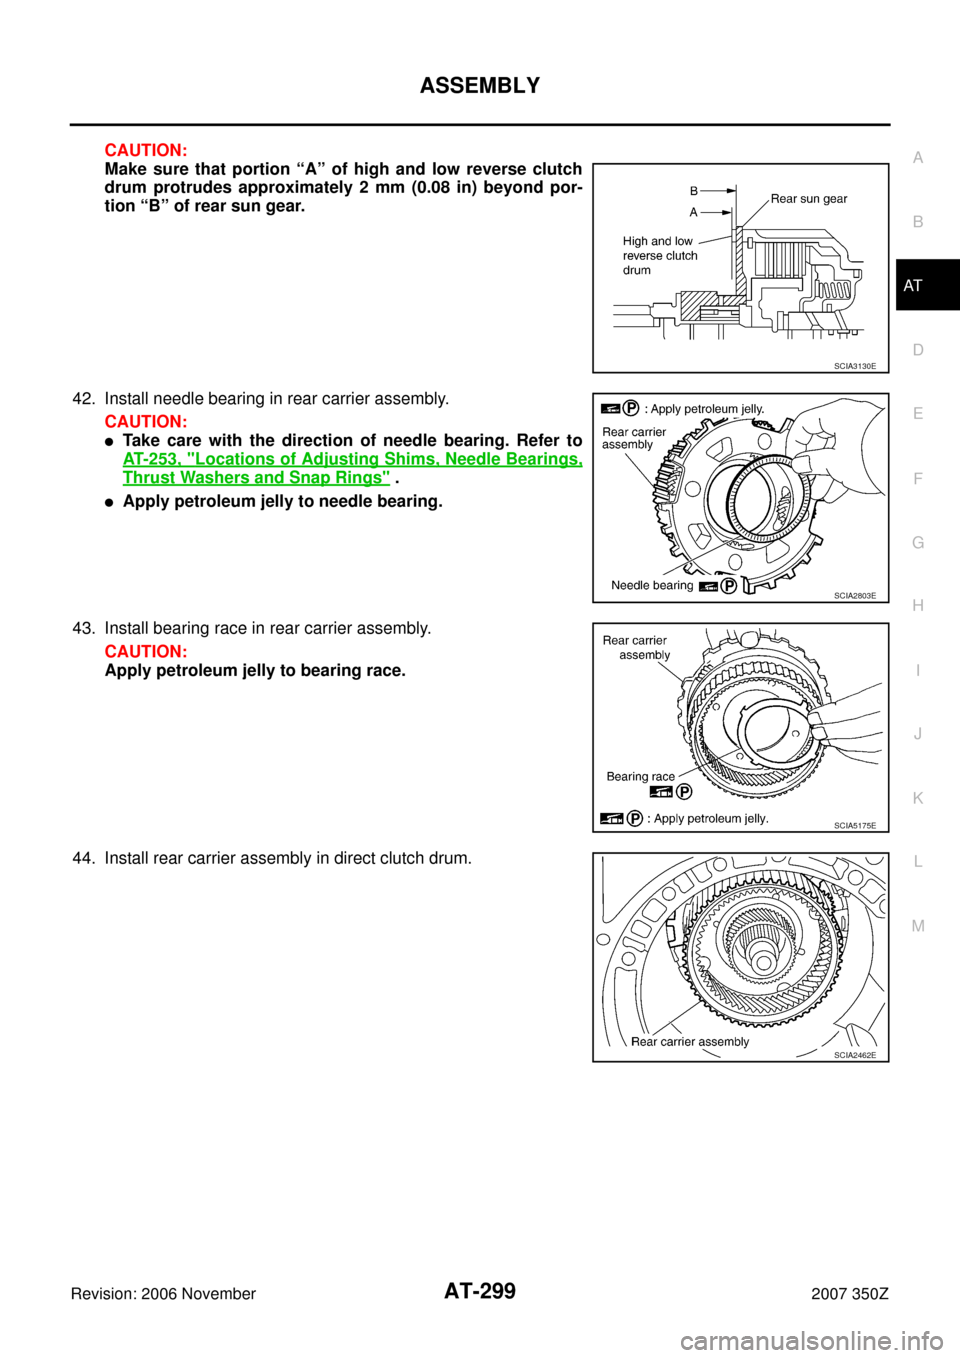 NISSAN 350Z 2007 Z33 Automatic Transmission Workshop Manual ASSEMBLY
AT-299
D
E
F
G
H
I
J
K
L
MA
B
AT
Revision: 2006 November2007 350Z
CAUTION:
Make sure that portion “A” of high and low reverse clutch
drum protrudes approximately 2 mm (0.08 in) beyond por